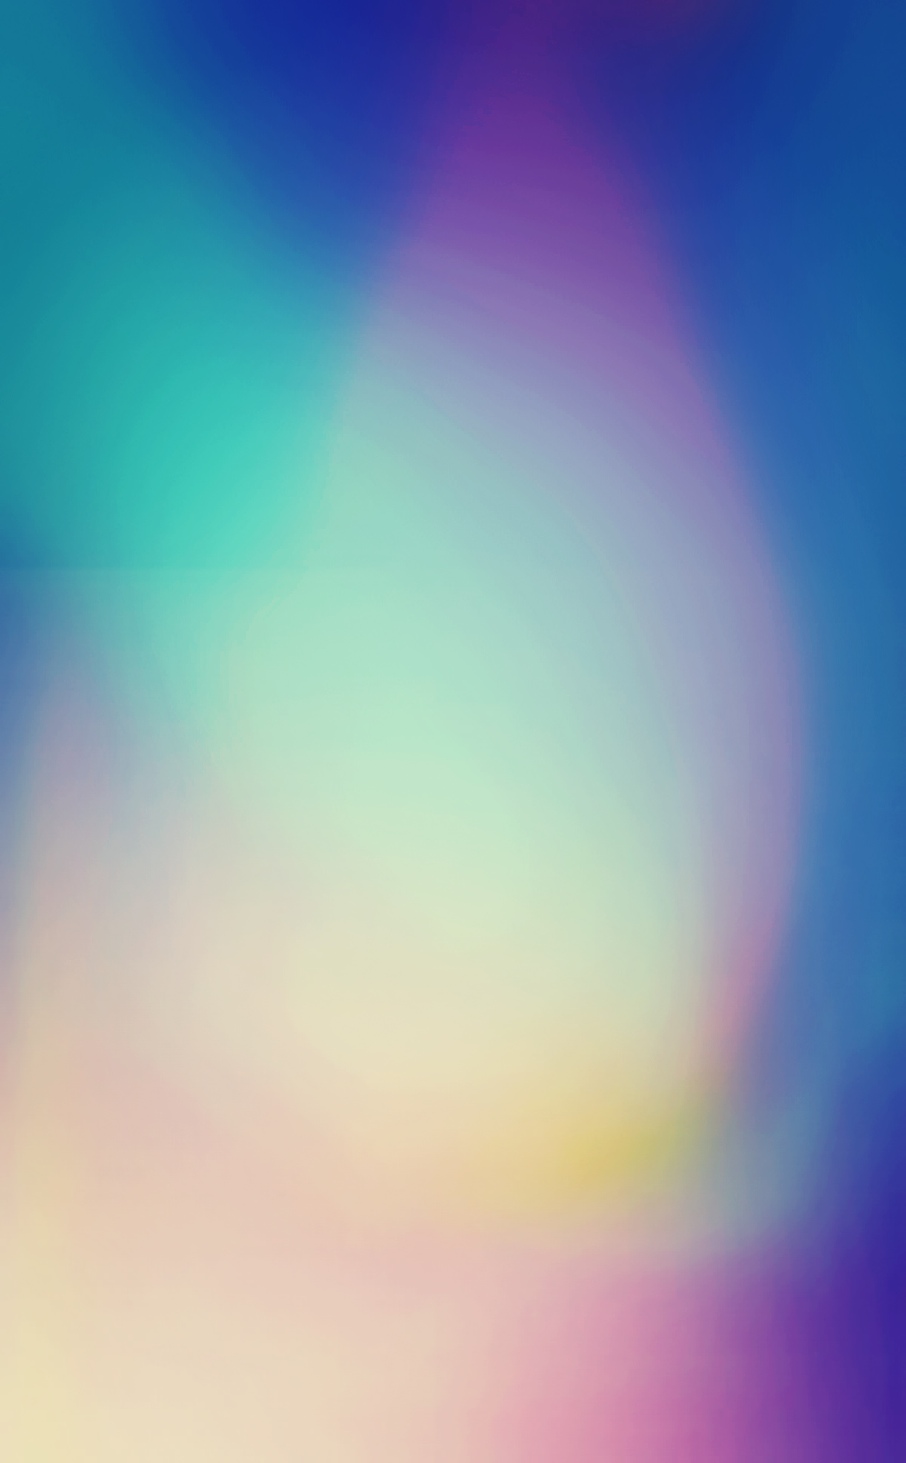 Subtle Cool Gradient Iphone Wallpaper - Cool Backgrounds Light Colored , HD Wallpaper & Backgrounds